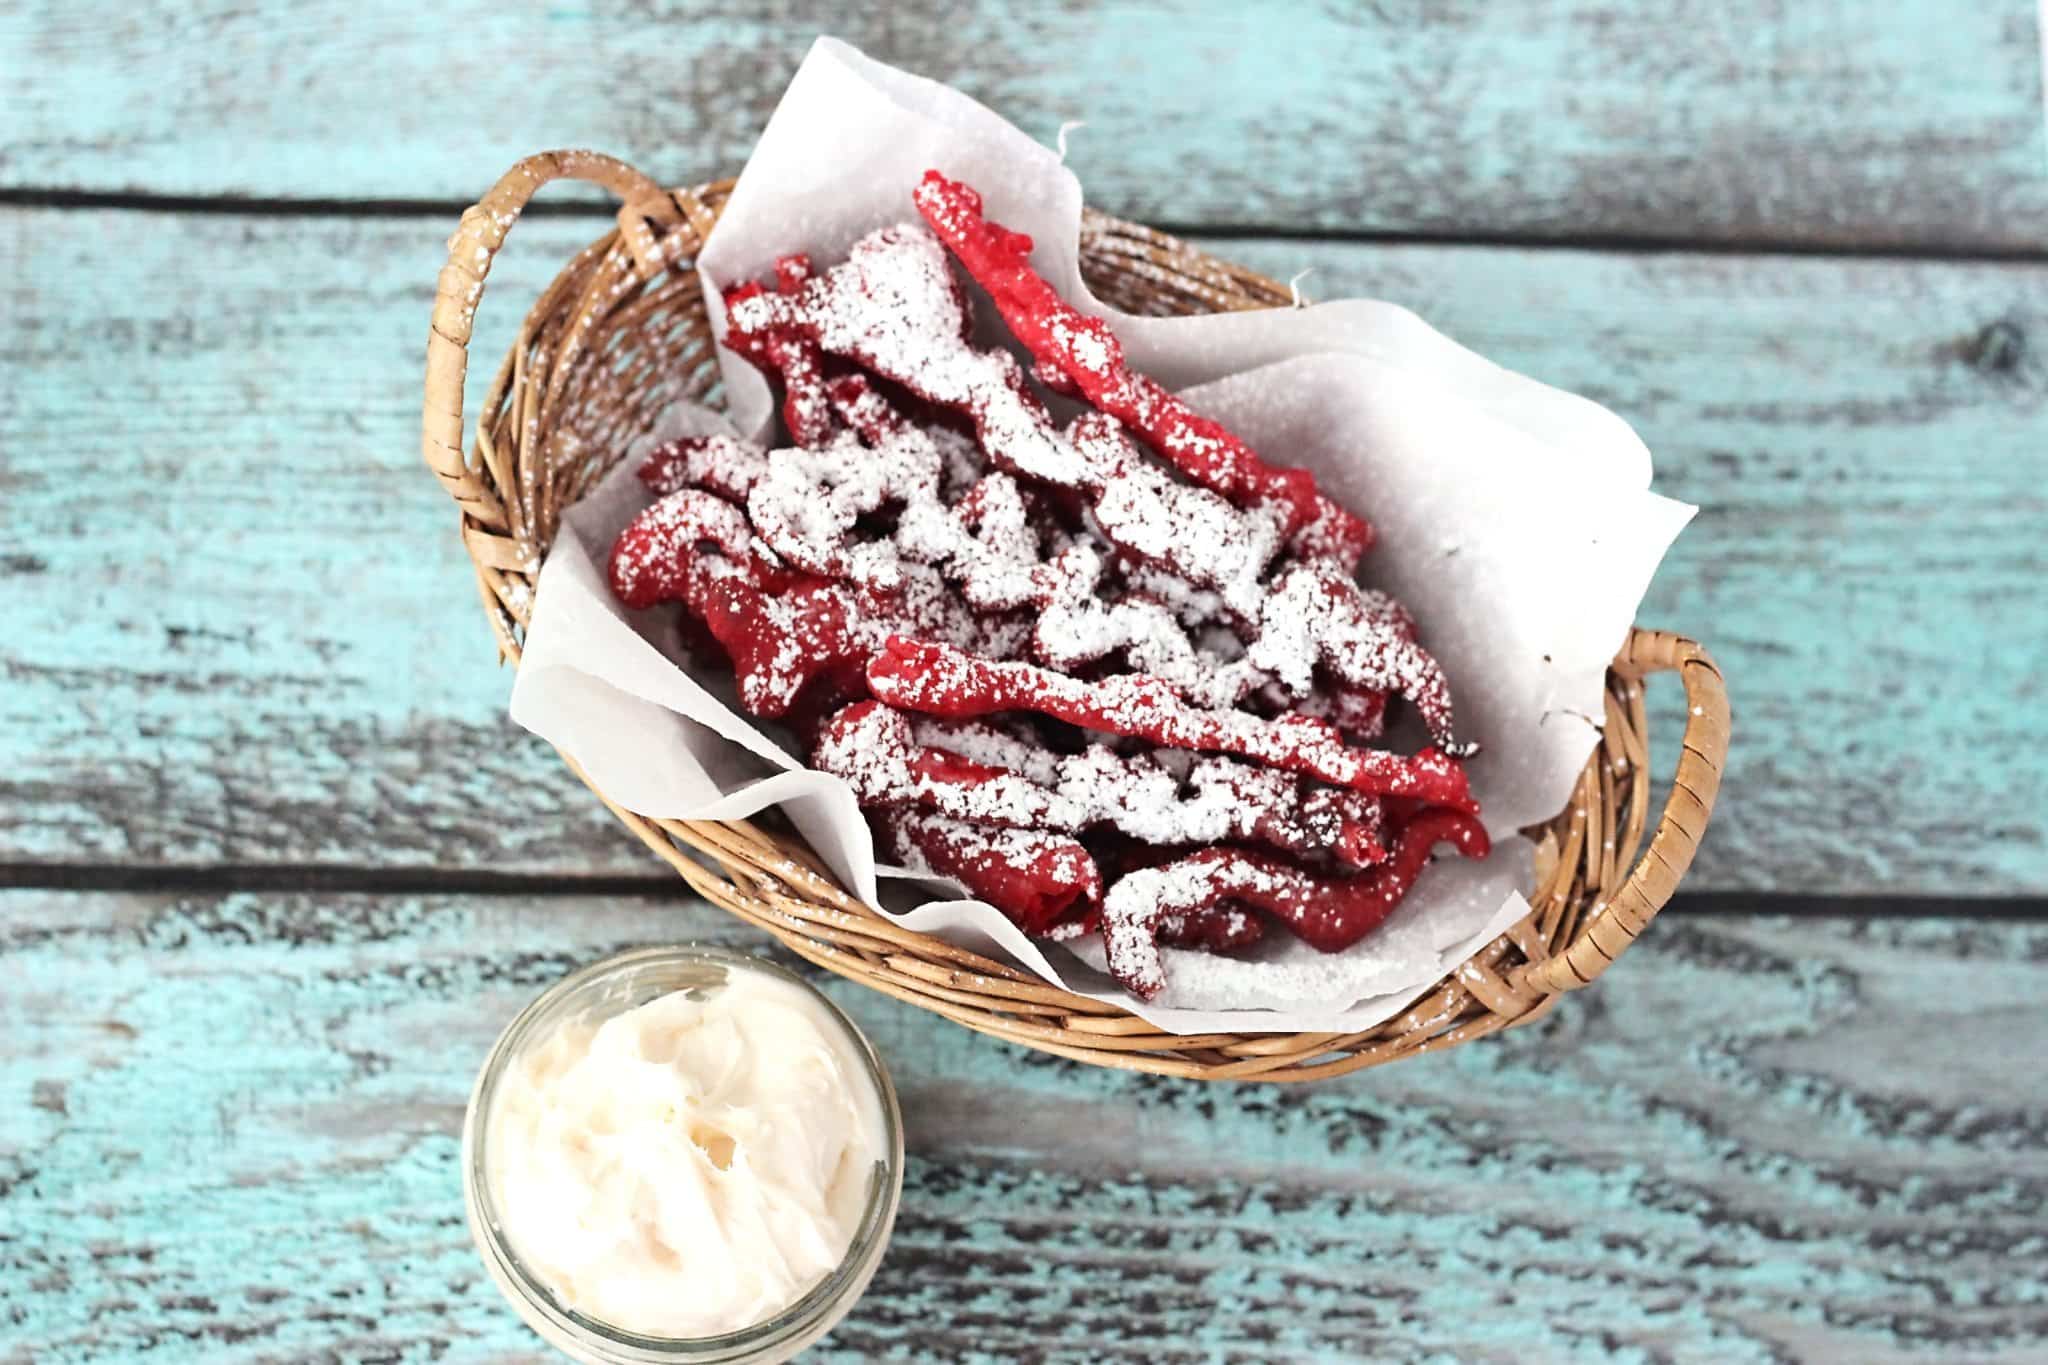 Whether you call them funnel cake fries or funnel cake sticks, this copycat recipe of the beloved fair food is served red velvet style with cream cheese frosting for dipping. It's a dessert to die for!